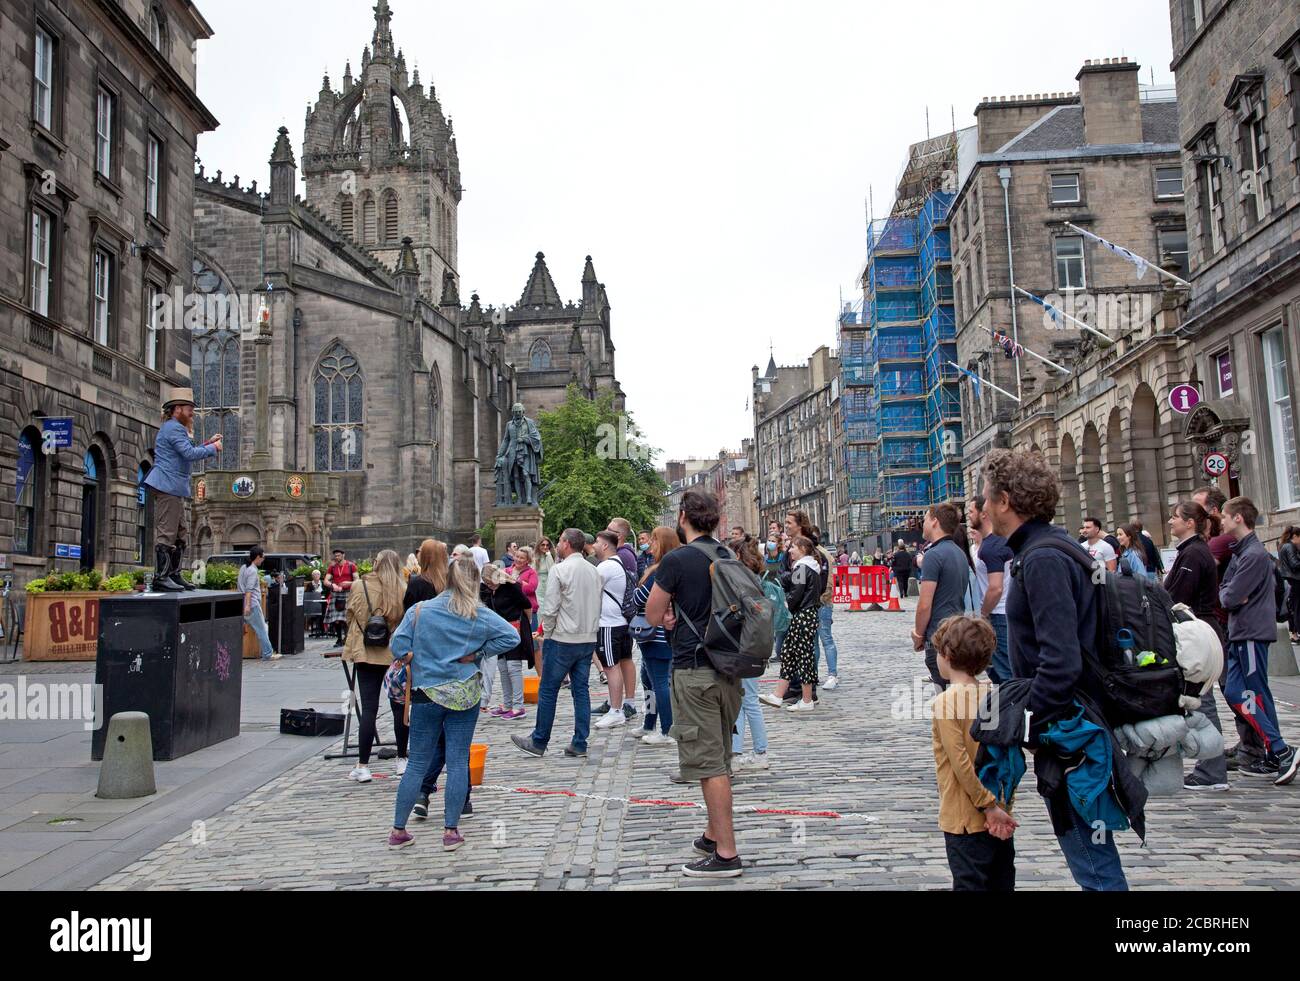 Edinburgh city centre, Scotland, UK. 15 August 2020. People in the city centre Royal Mile. The city's pavements appeared busier than they have been for the last five months during the Coronavirus pandemic. .May result in a bonus for the retail trade.  plus audience for Street Performer on Royal Mile. Stock Photo